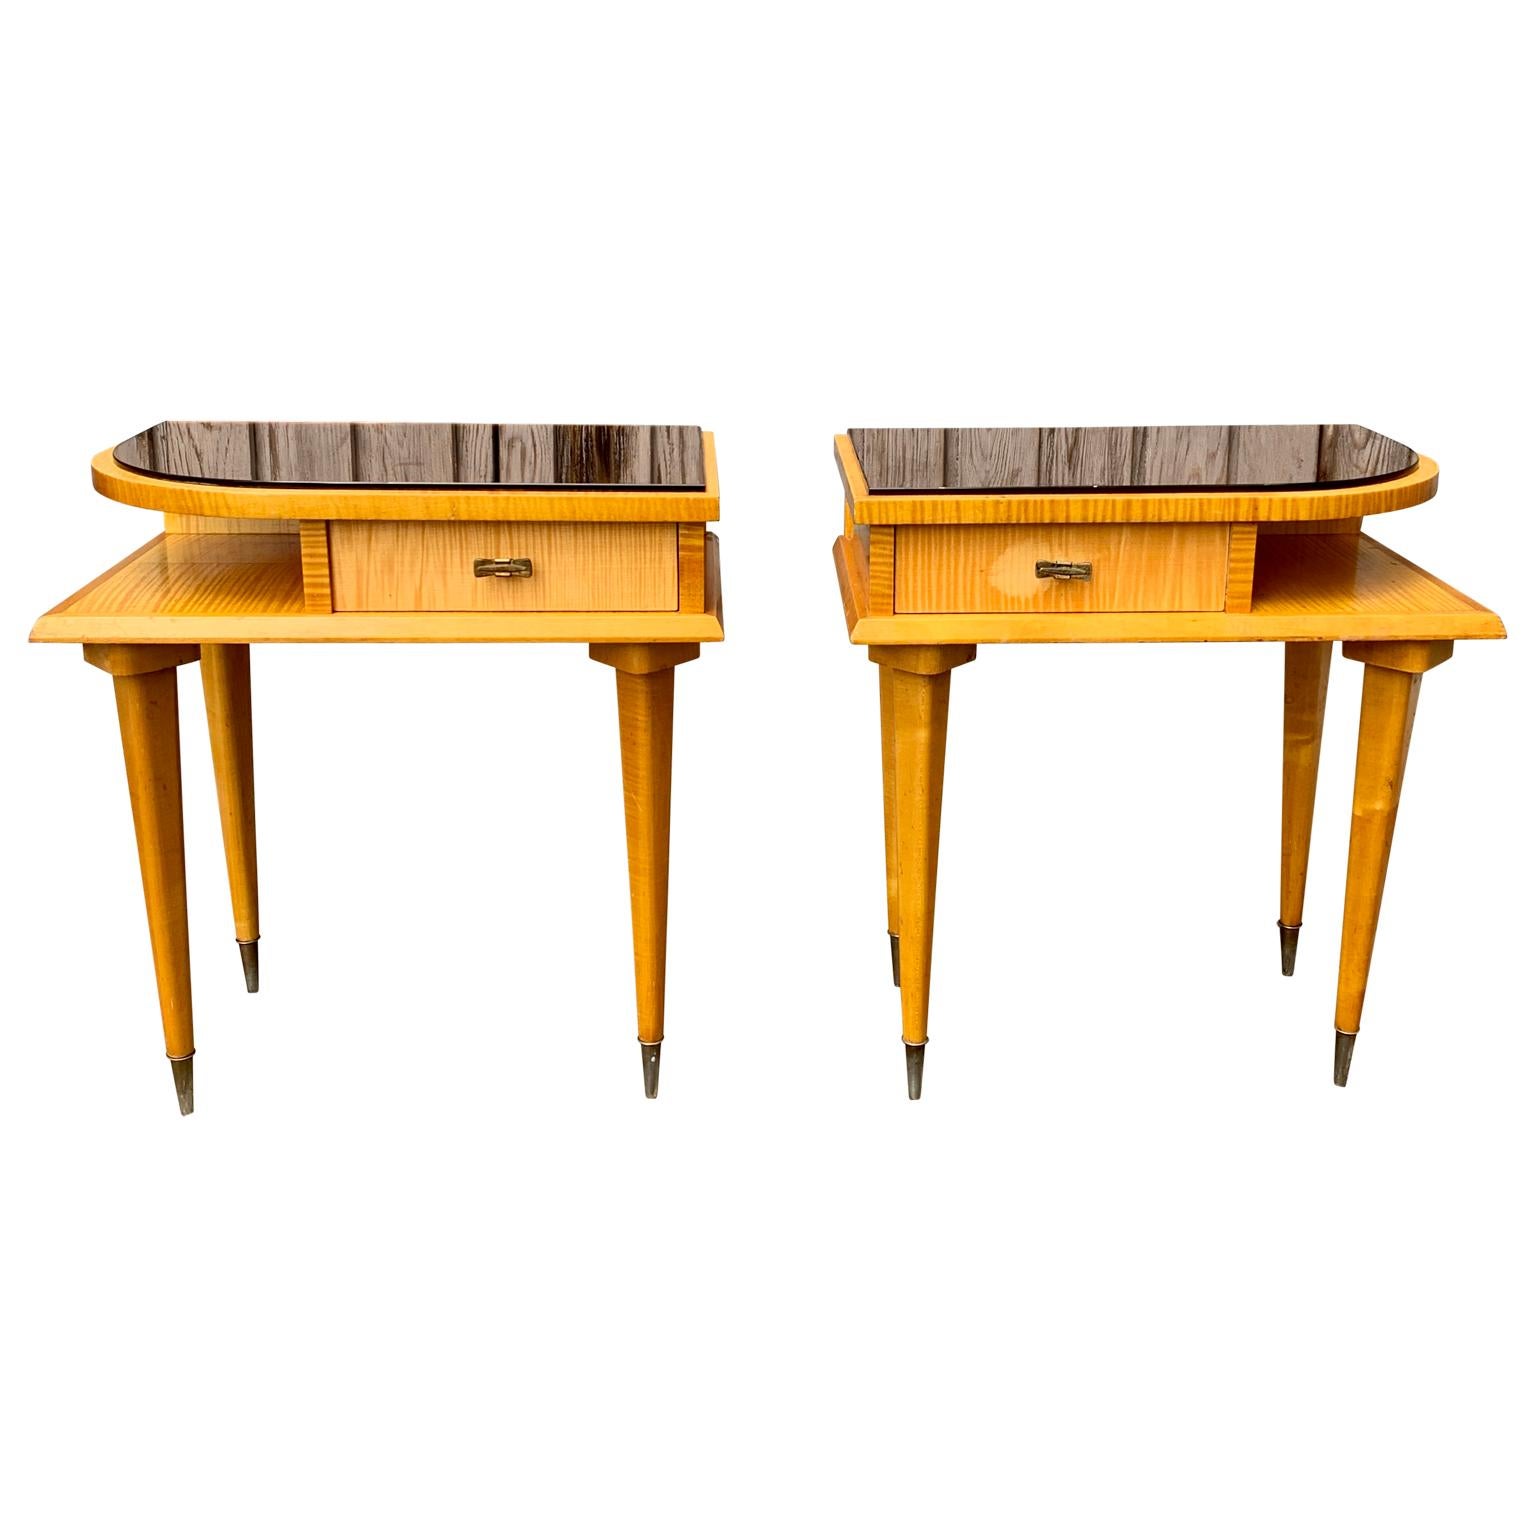 A pair of French design nightstands or small night tables in birch wood with the original brass handles and light warm pink glass on top. This unusual pair of vintage nightstands were produced by Ameublement N.F. 